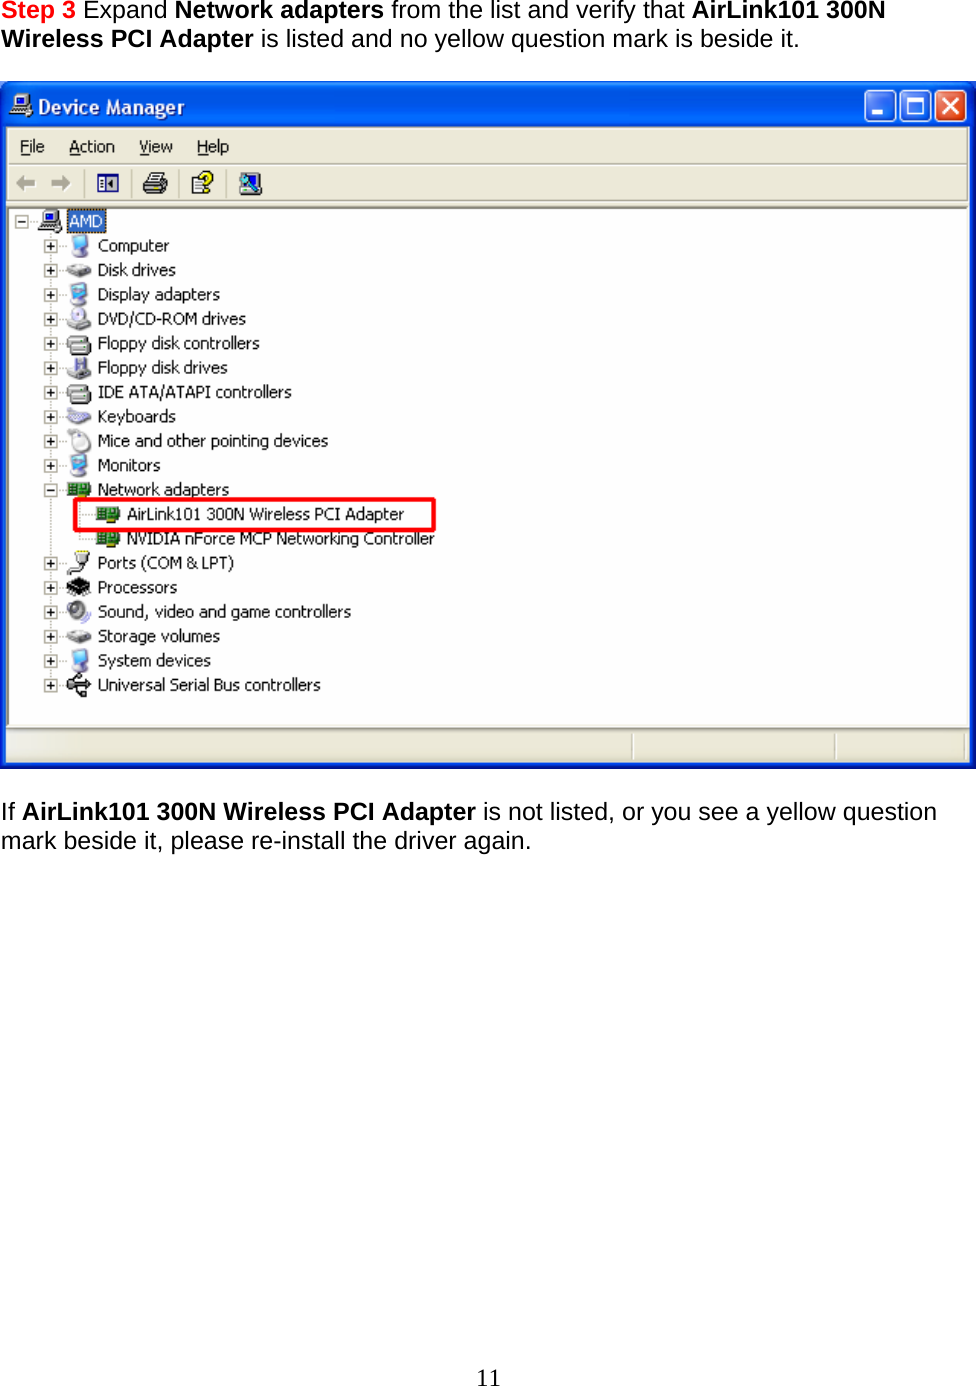 11  Step 3 Expand Network adapters from the list and verify that AirLink101 300N Wireless PCI Adapter is listed and no yellow question mark is beside it.    If AirLink101 300N Wireless PCI Adapter is not listed, or you see a yellow question mark beside it, please re-install the driver again.                 